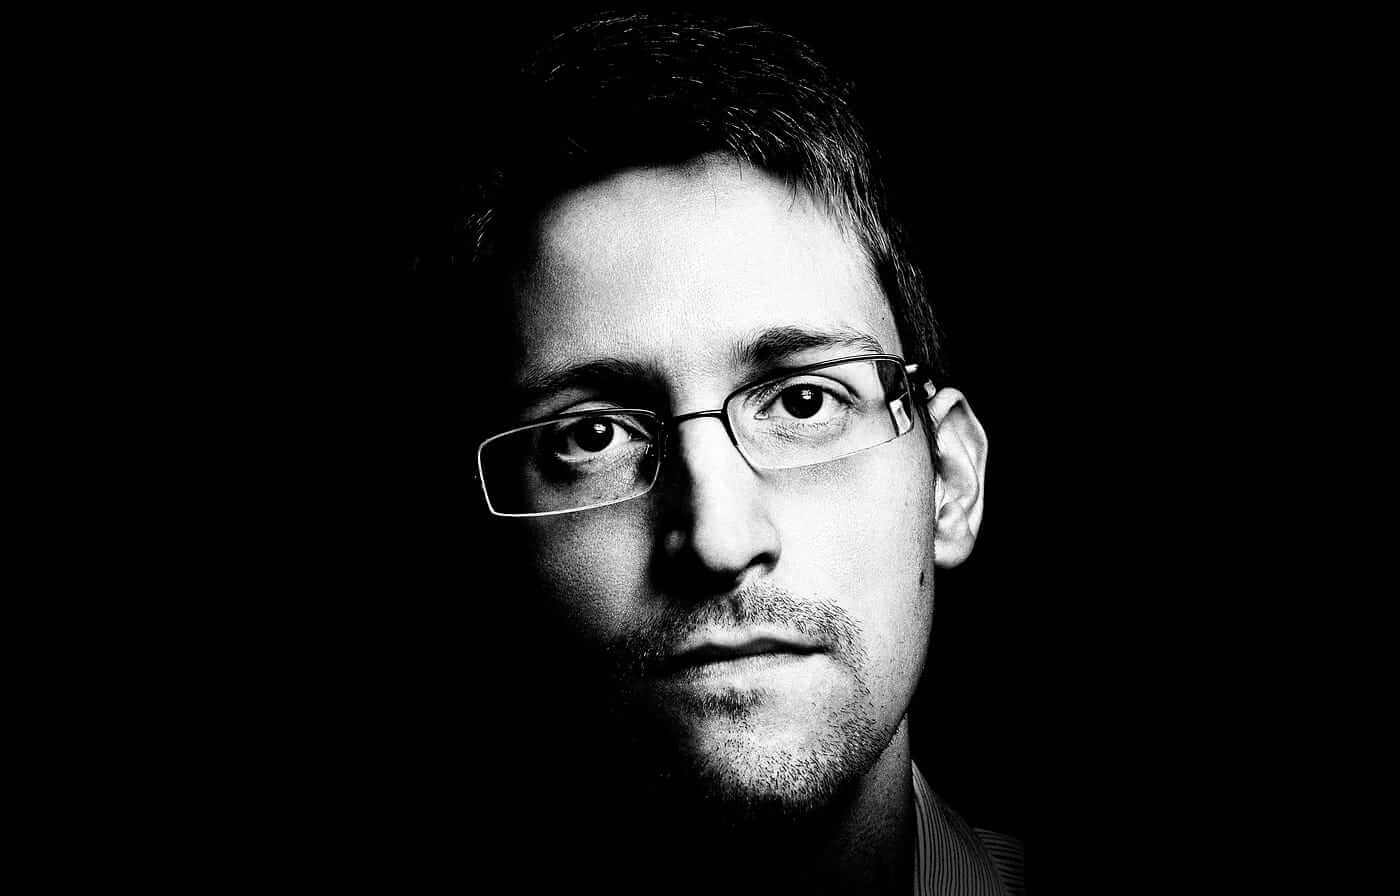 Edward Snowden Just Revealed Terrifying Government Secrets In A New Chilling Message